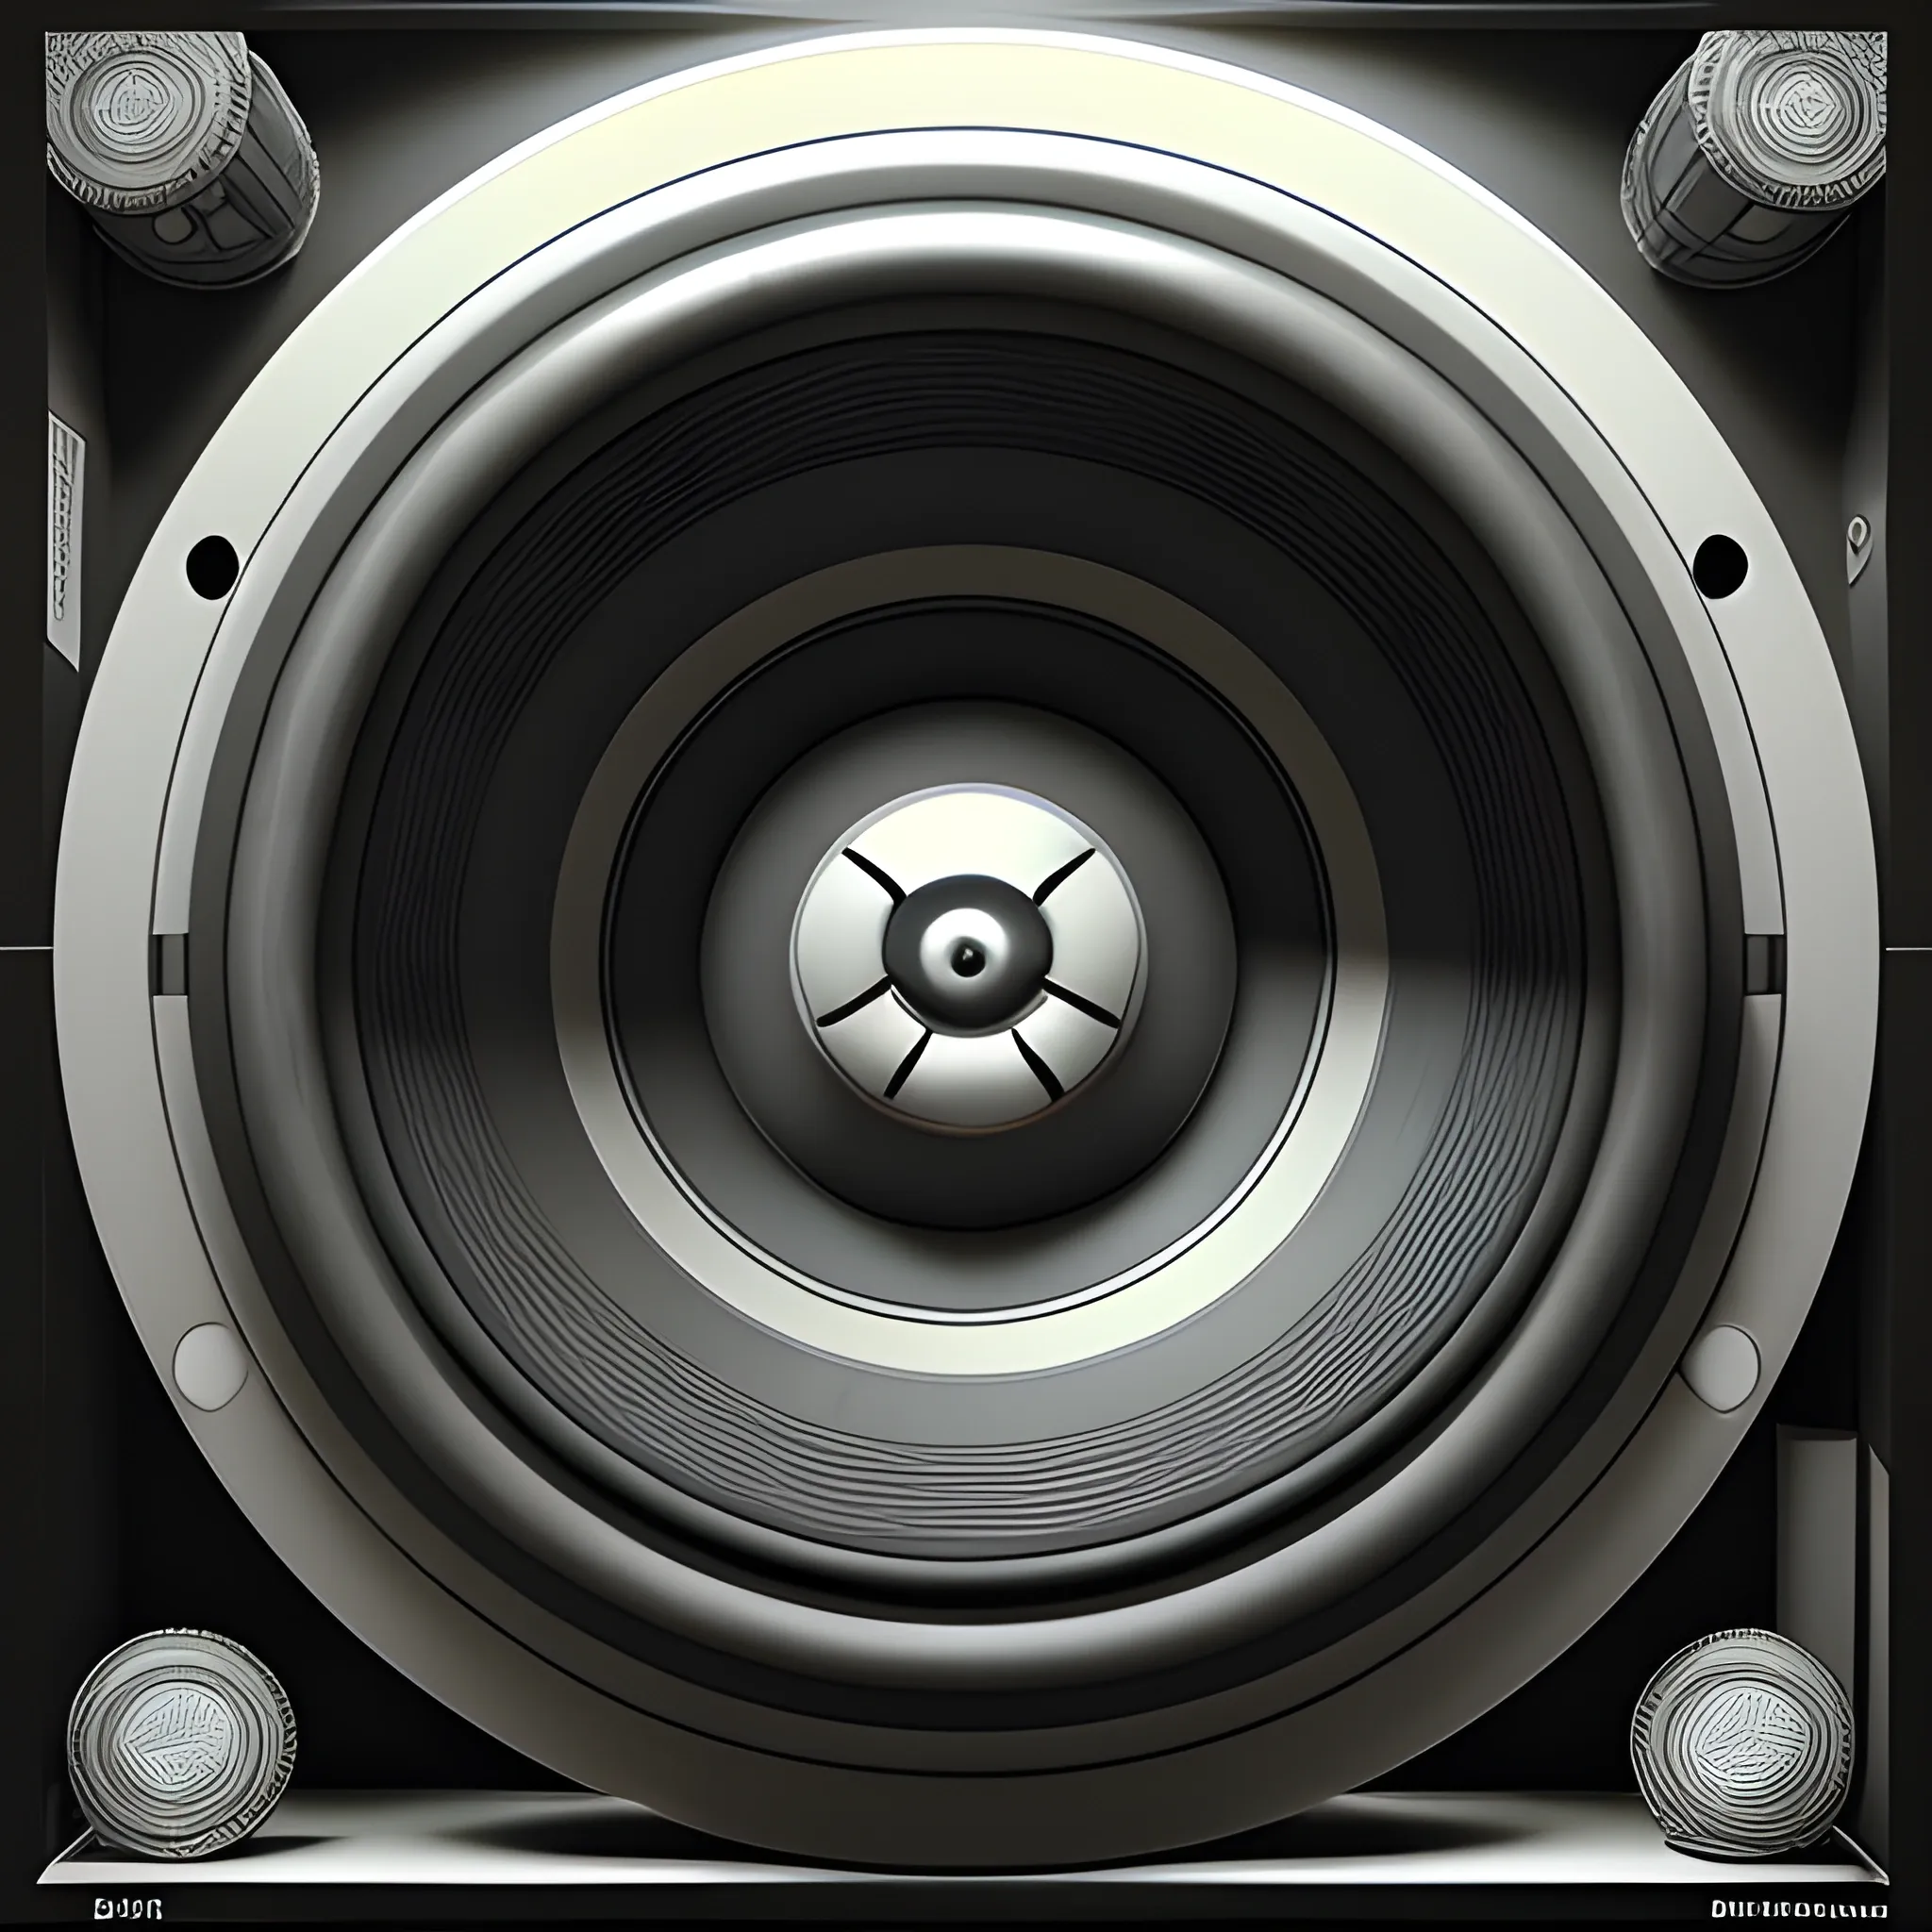 3D, Sci-Fi, Hip-hop, Urban, greyscale colored, circular avatar. high-definition, realistic, intricate detailing, embossed circular subwoofer frame, transparent background